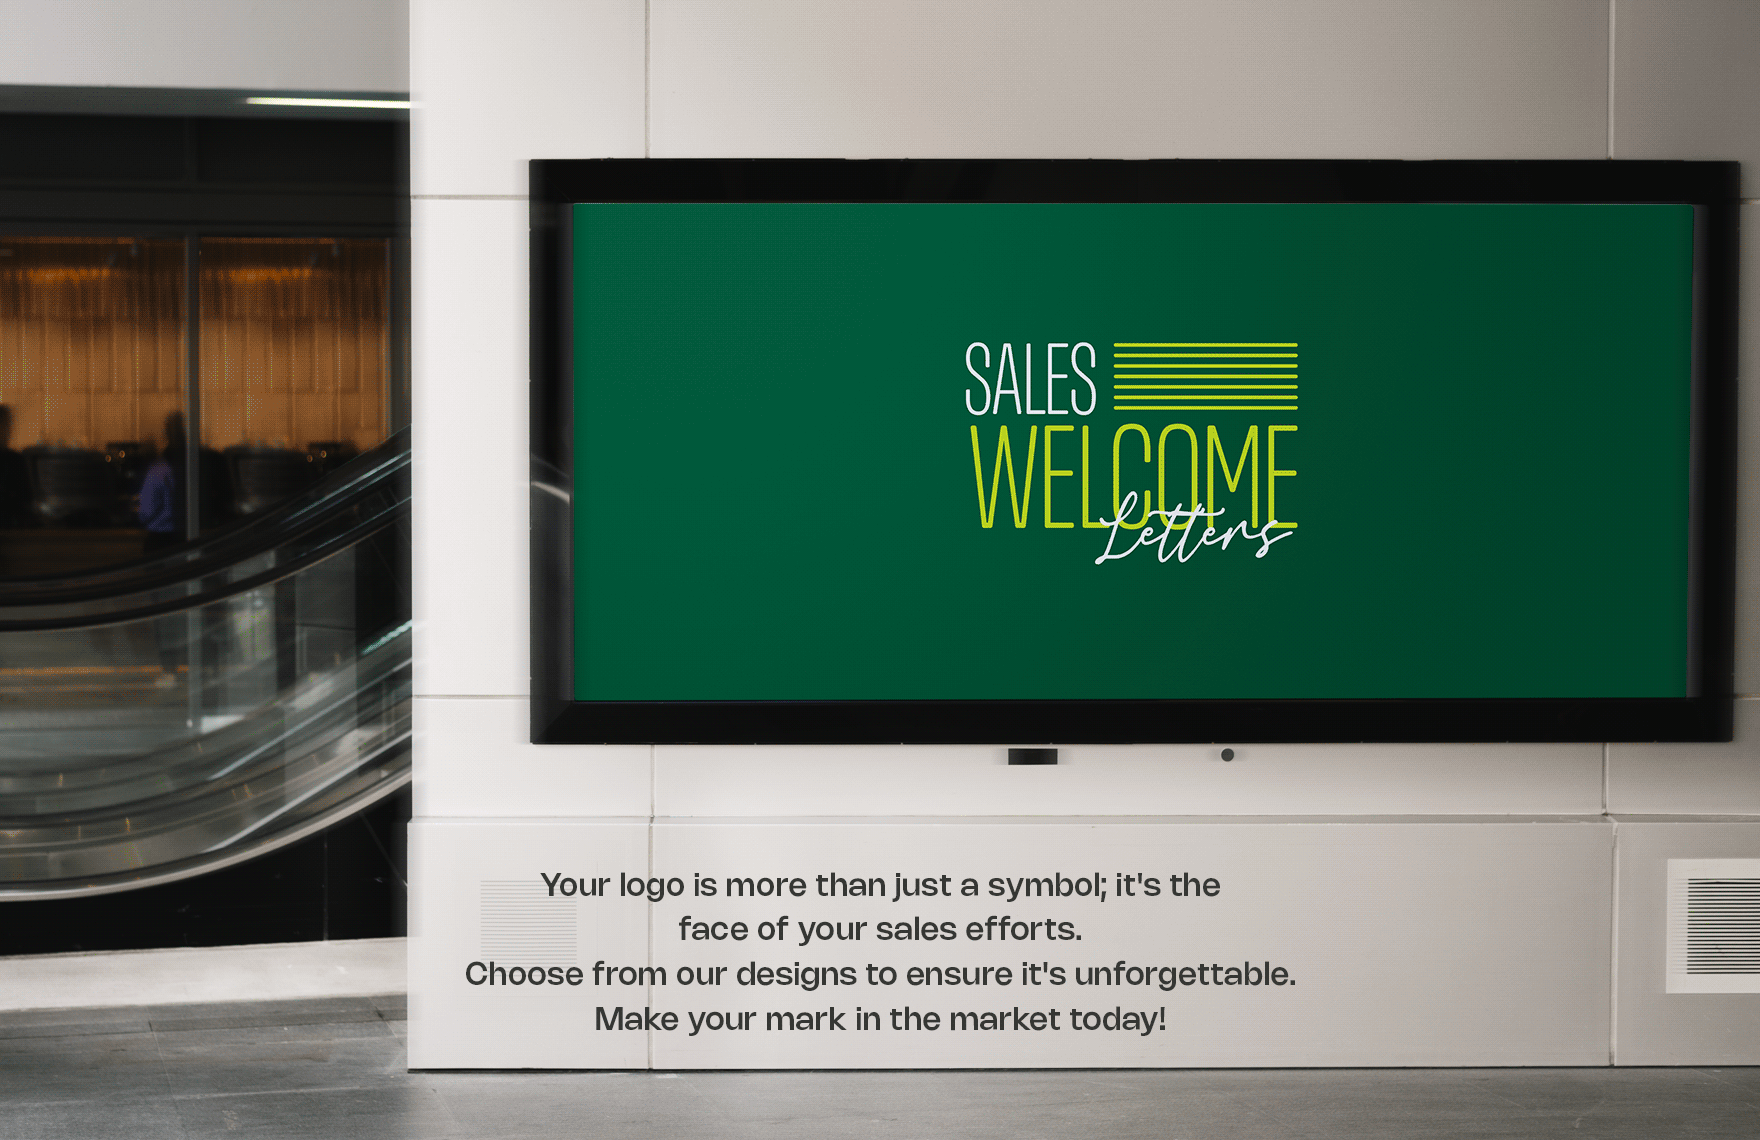 Sales Welcome Letters Logo Template